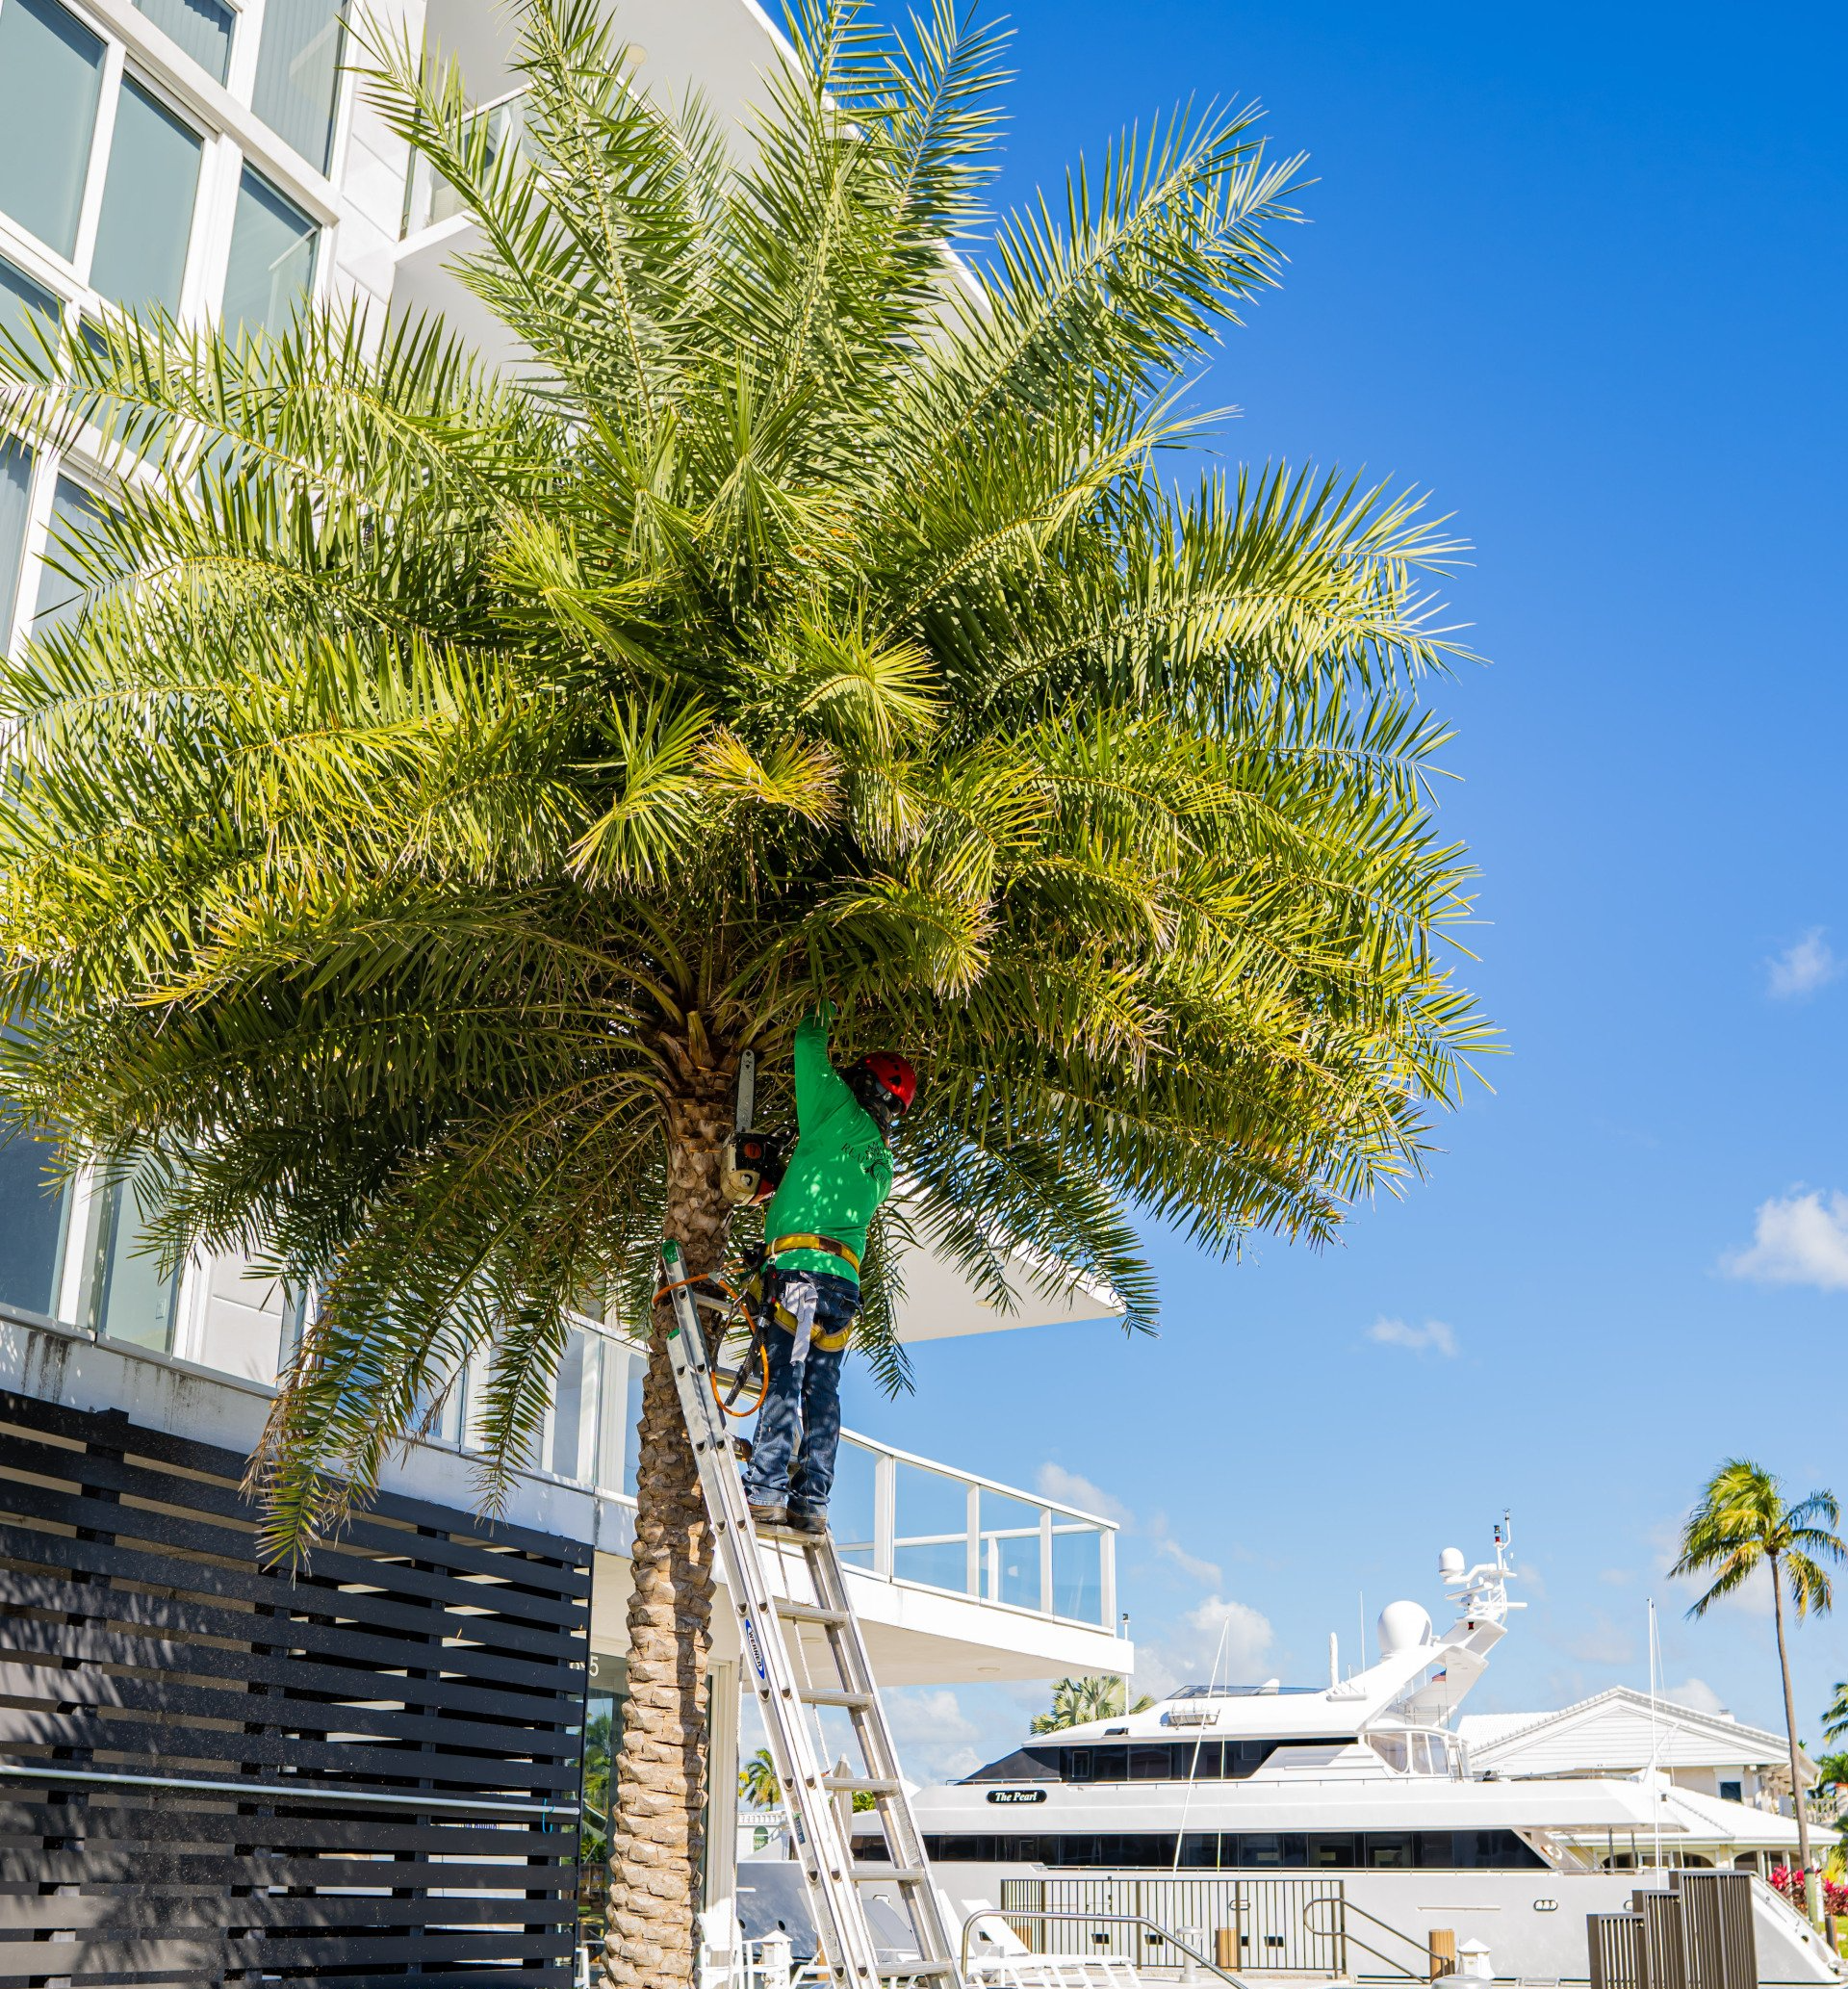 Certified arborist from the Real Tree Team carrying out palm tree trimming in Delray Beach FL